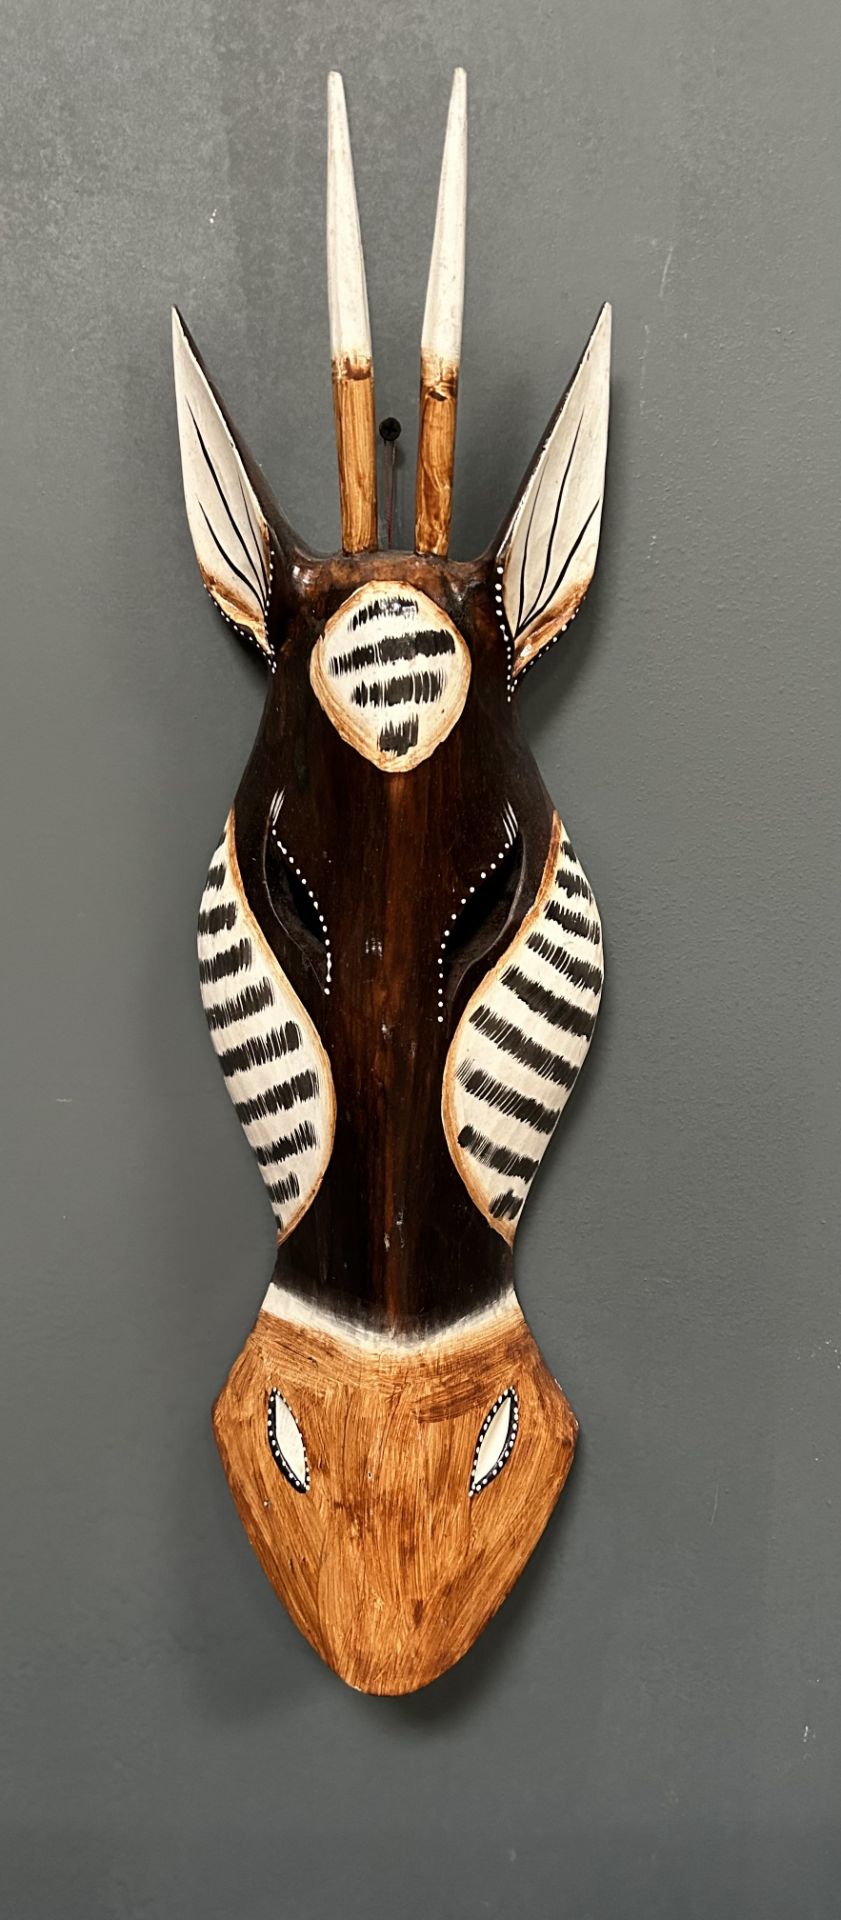 LARGE 50CM TALL WOODEN WALL HANGING DECORATIVE ANIMAL MASK